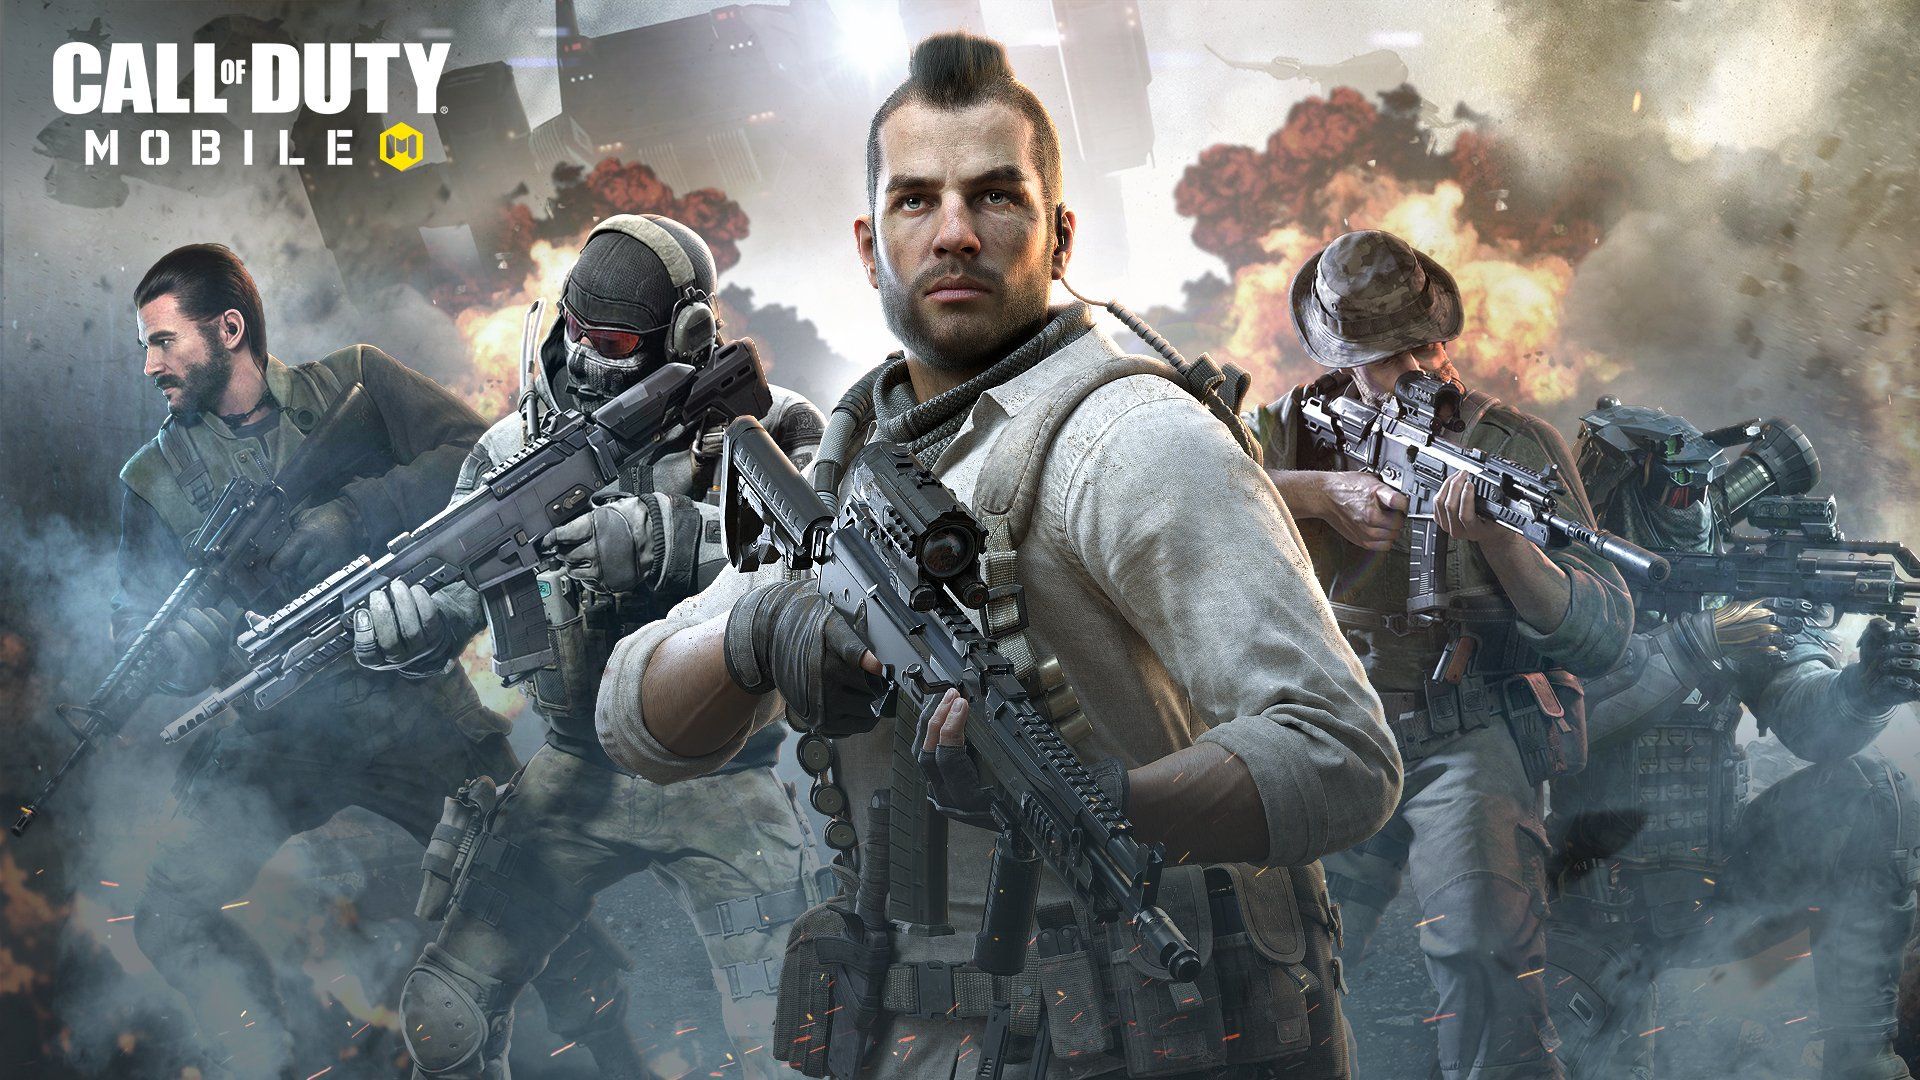 Call of Duty: Mobile launches worldwide October 1 on iOS and Android